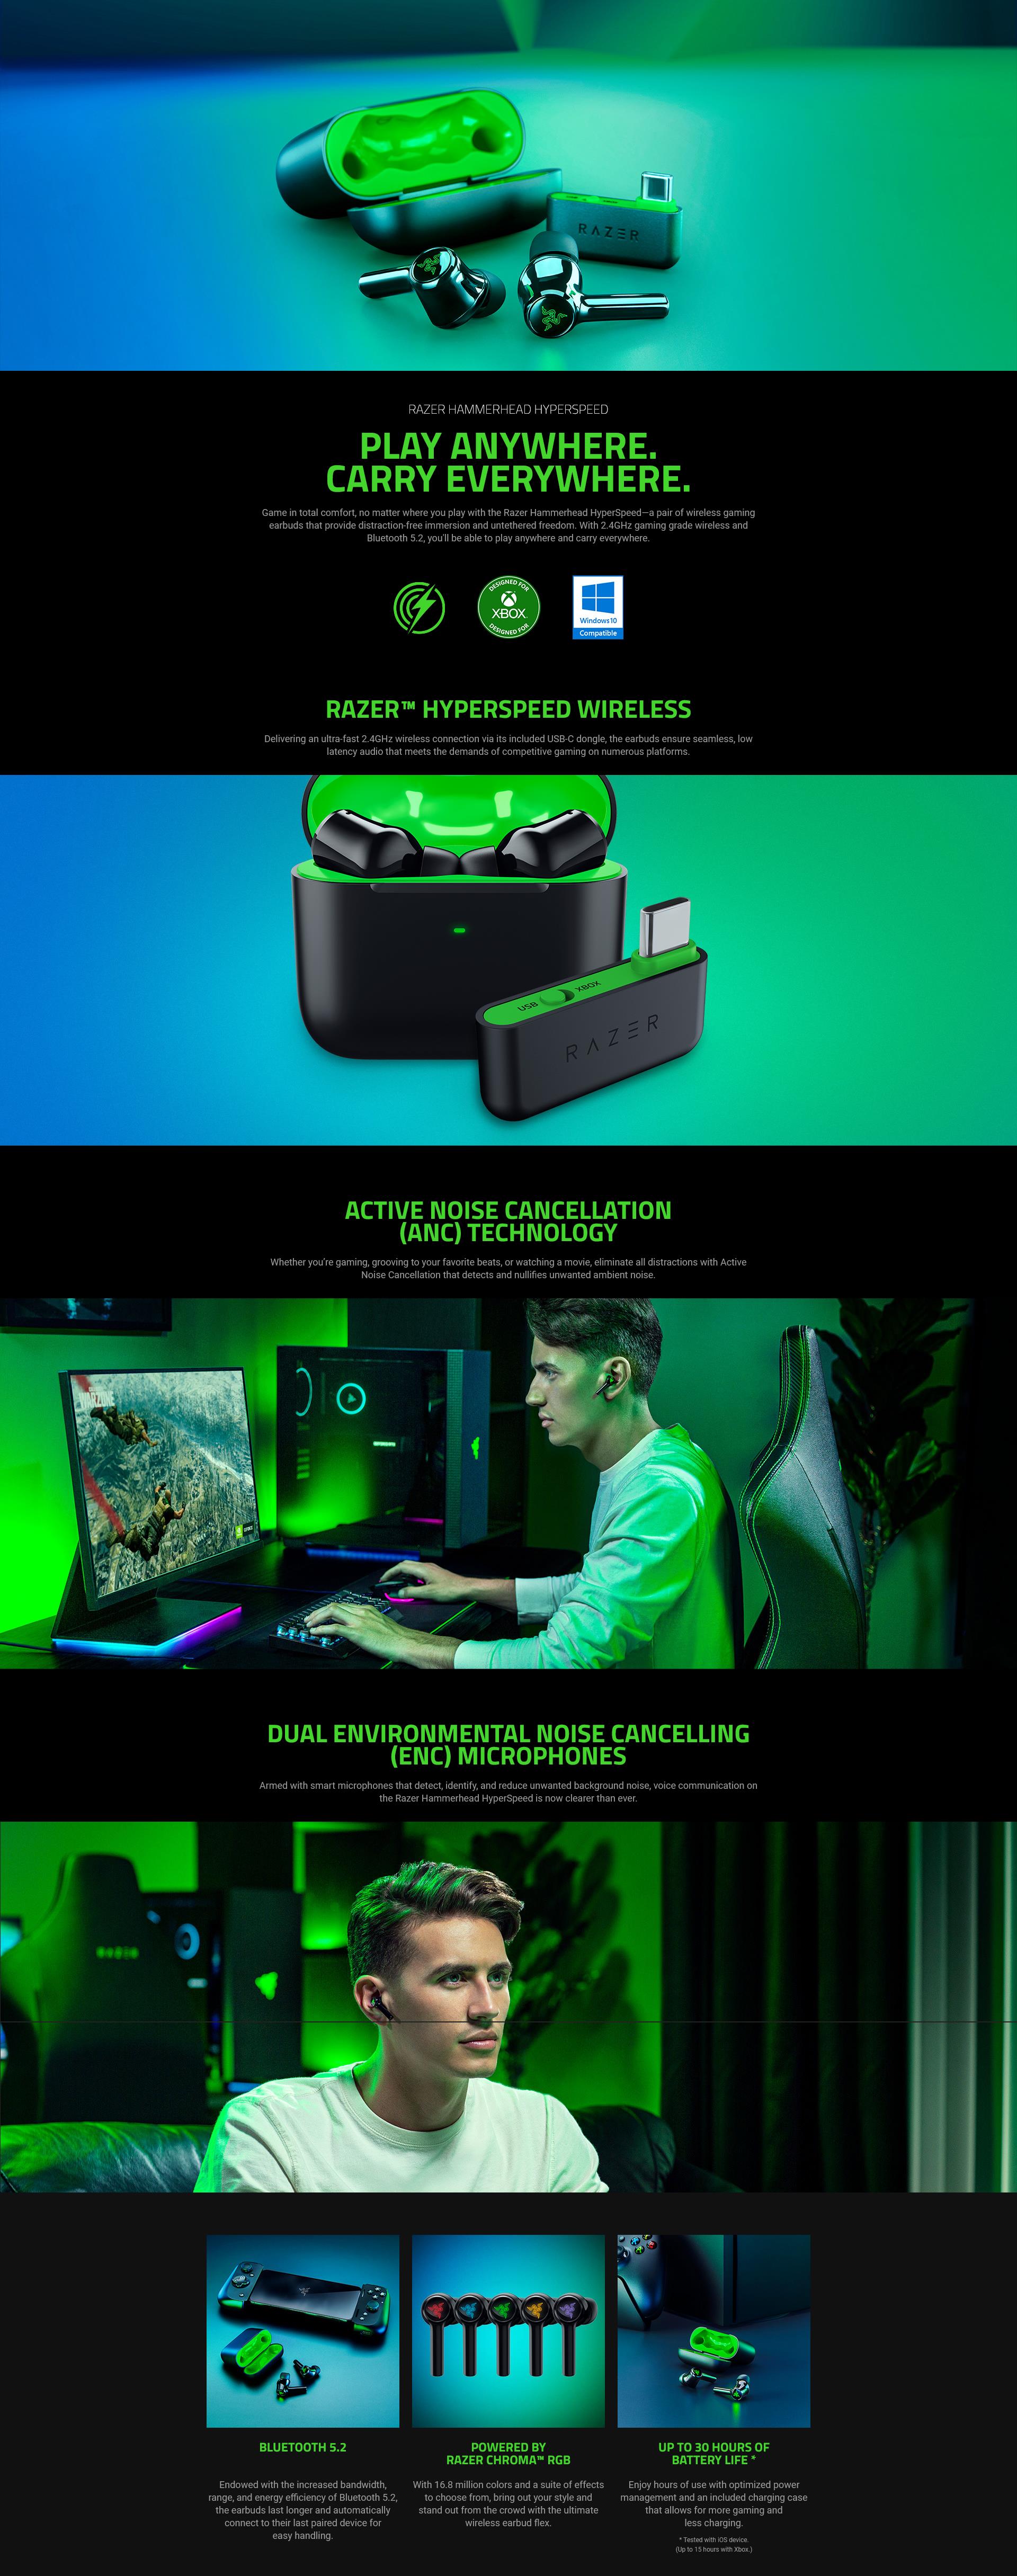 A large marketing image providing additional information about the product Razer Hammerhead HyperSpeed - Wireless Multi-Platform Gaming Earbuds (Xbox Licensed) - Additional alt info not provided